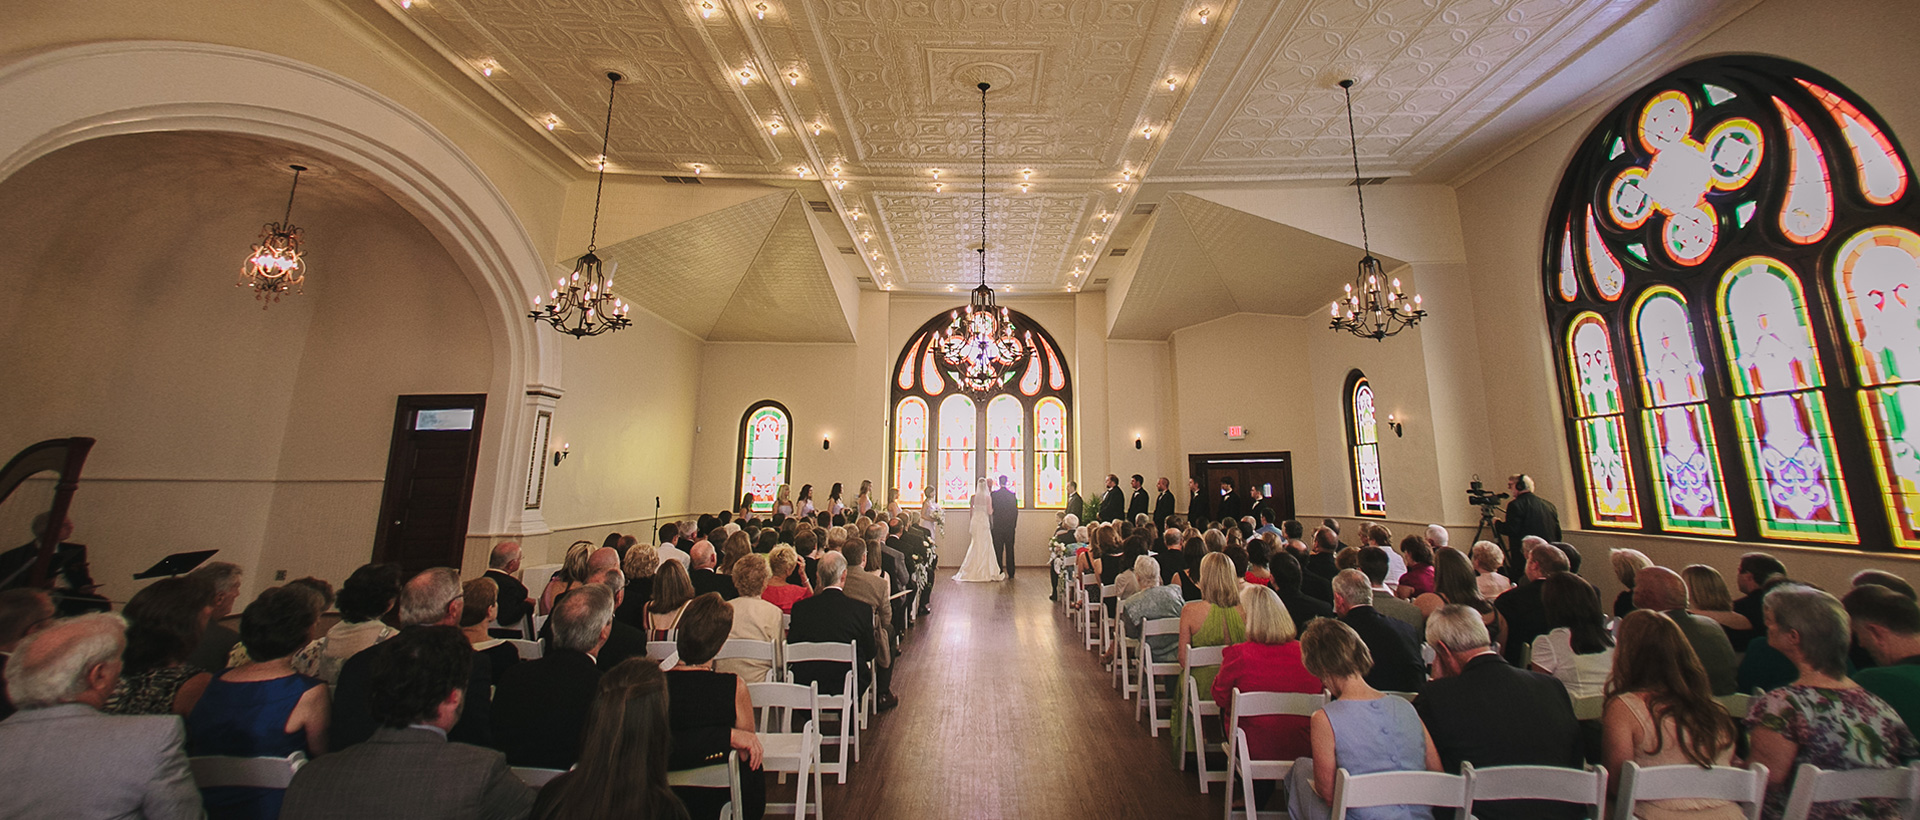 Historic Weddings and Events in Downtown Chattanooga